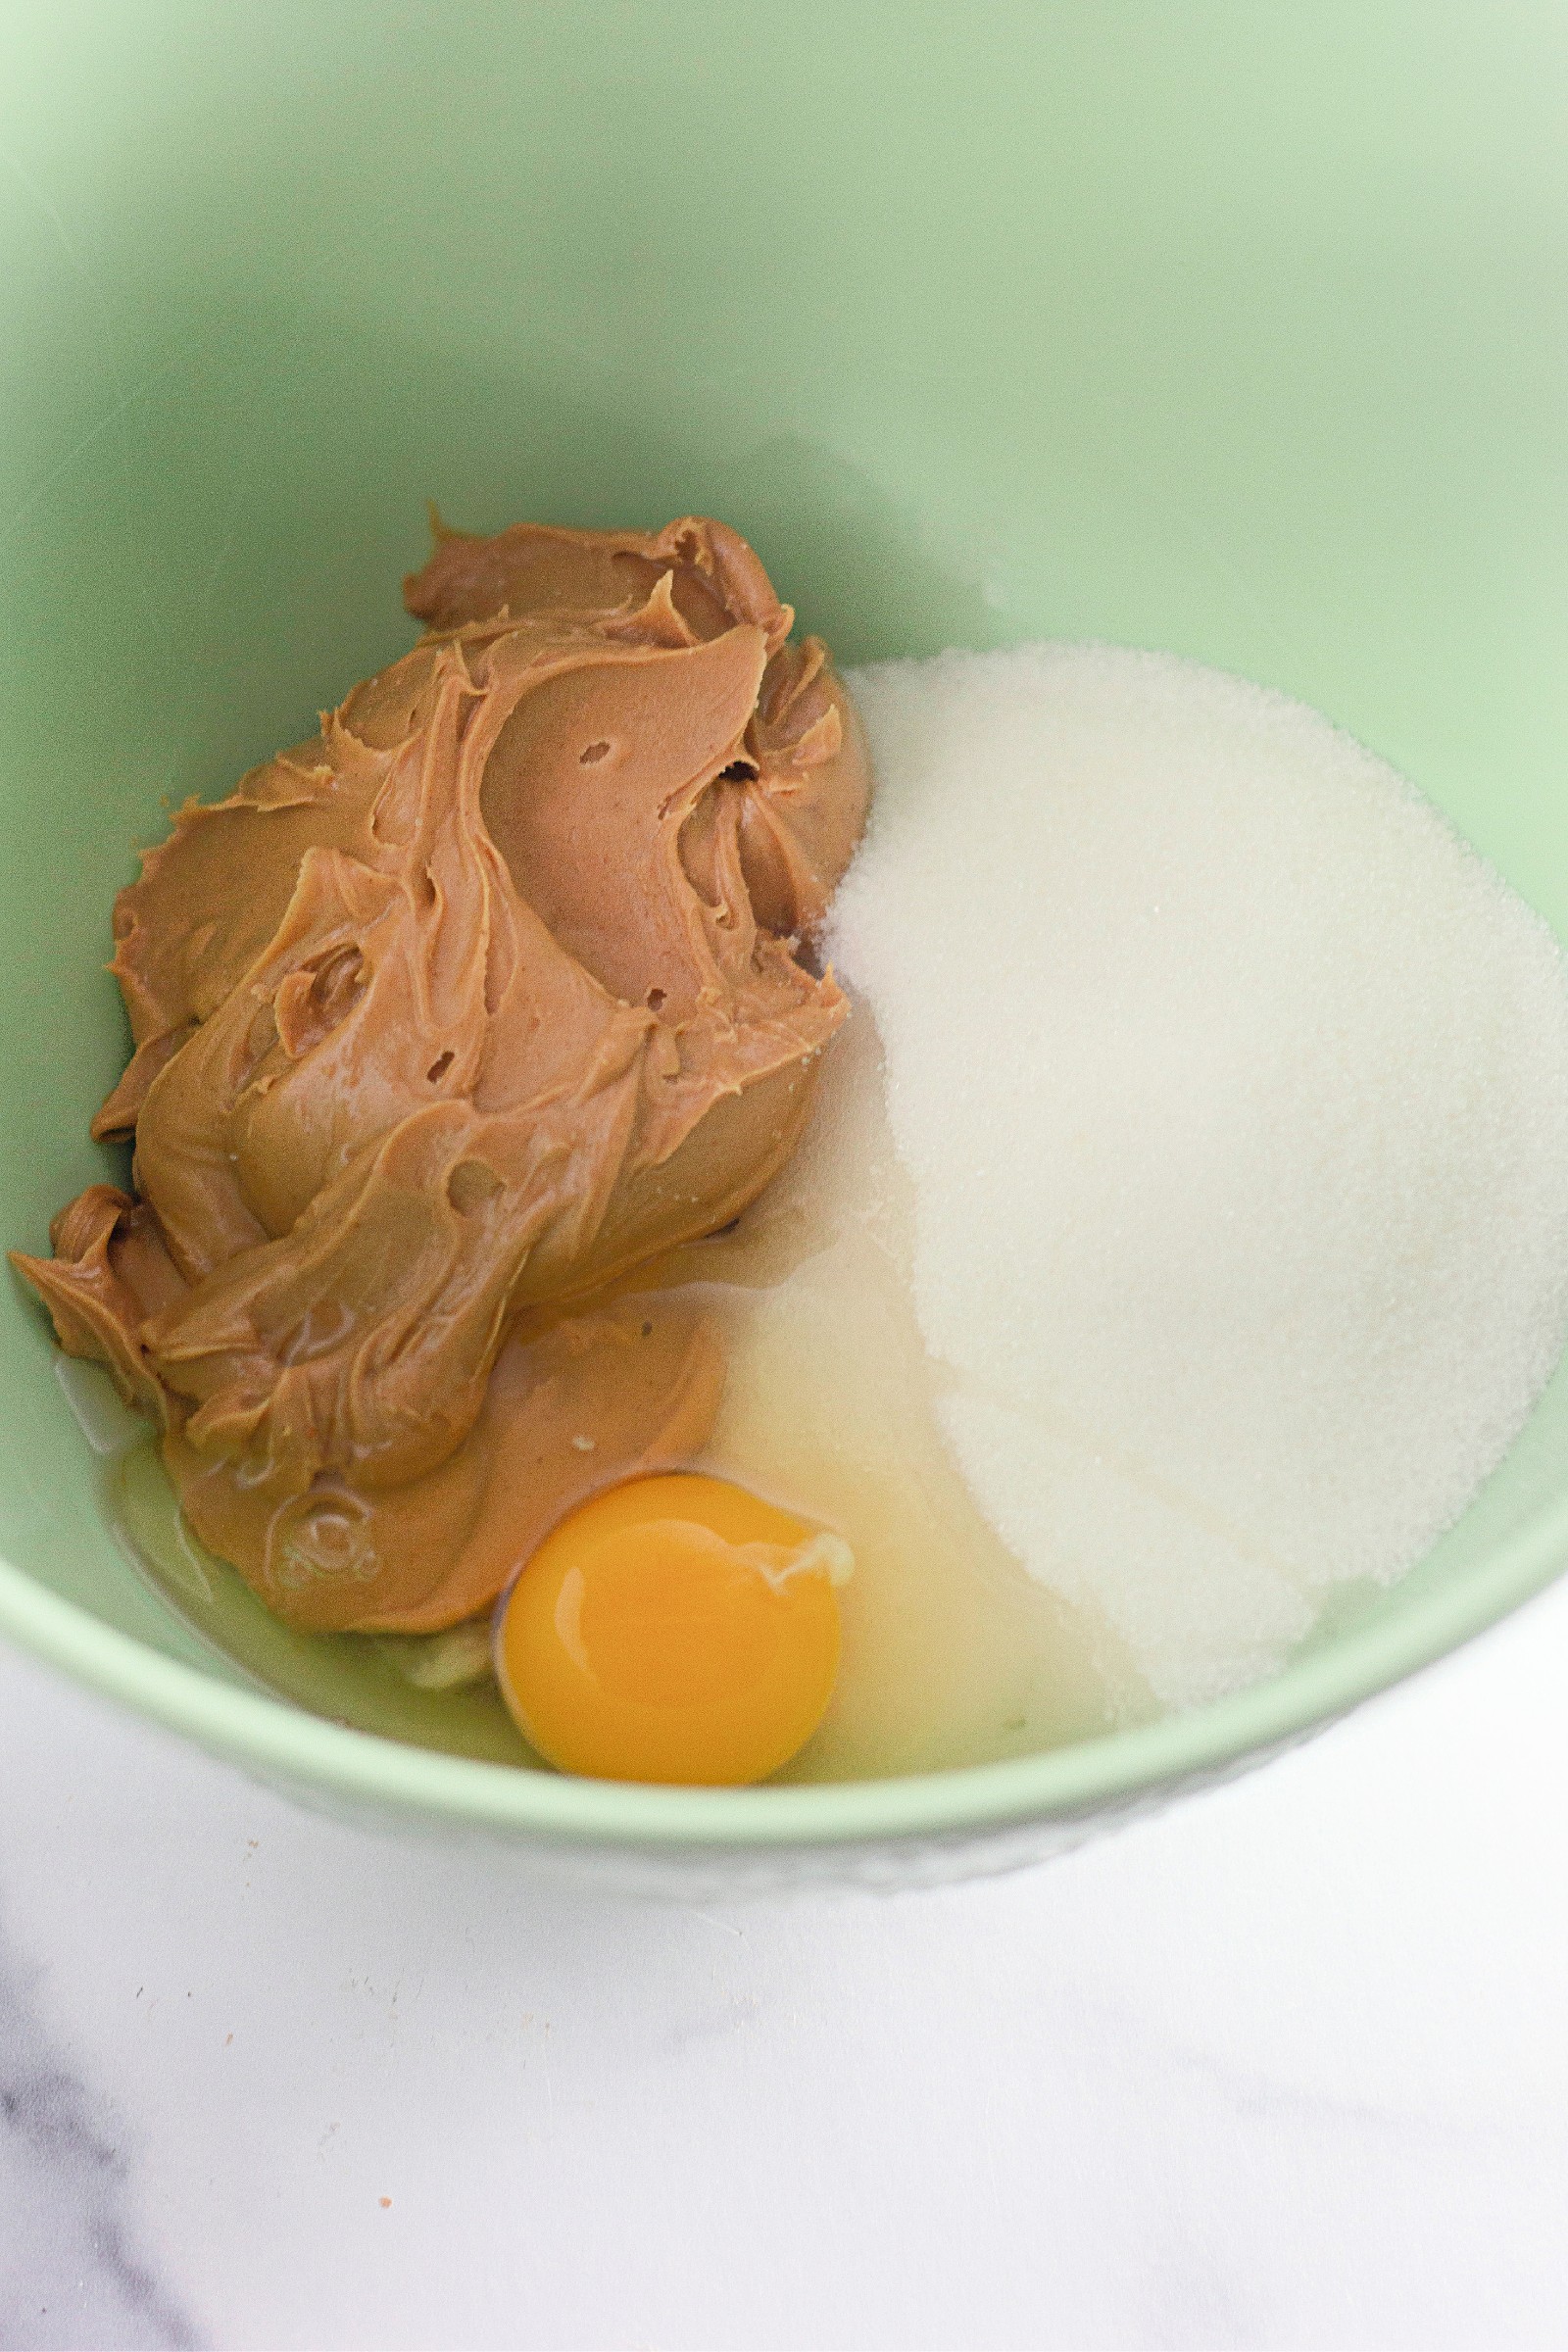 Peanut butter, sugar, and an egg in a green mixing bowl to make cookies.